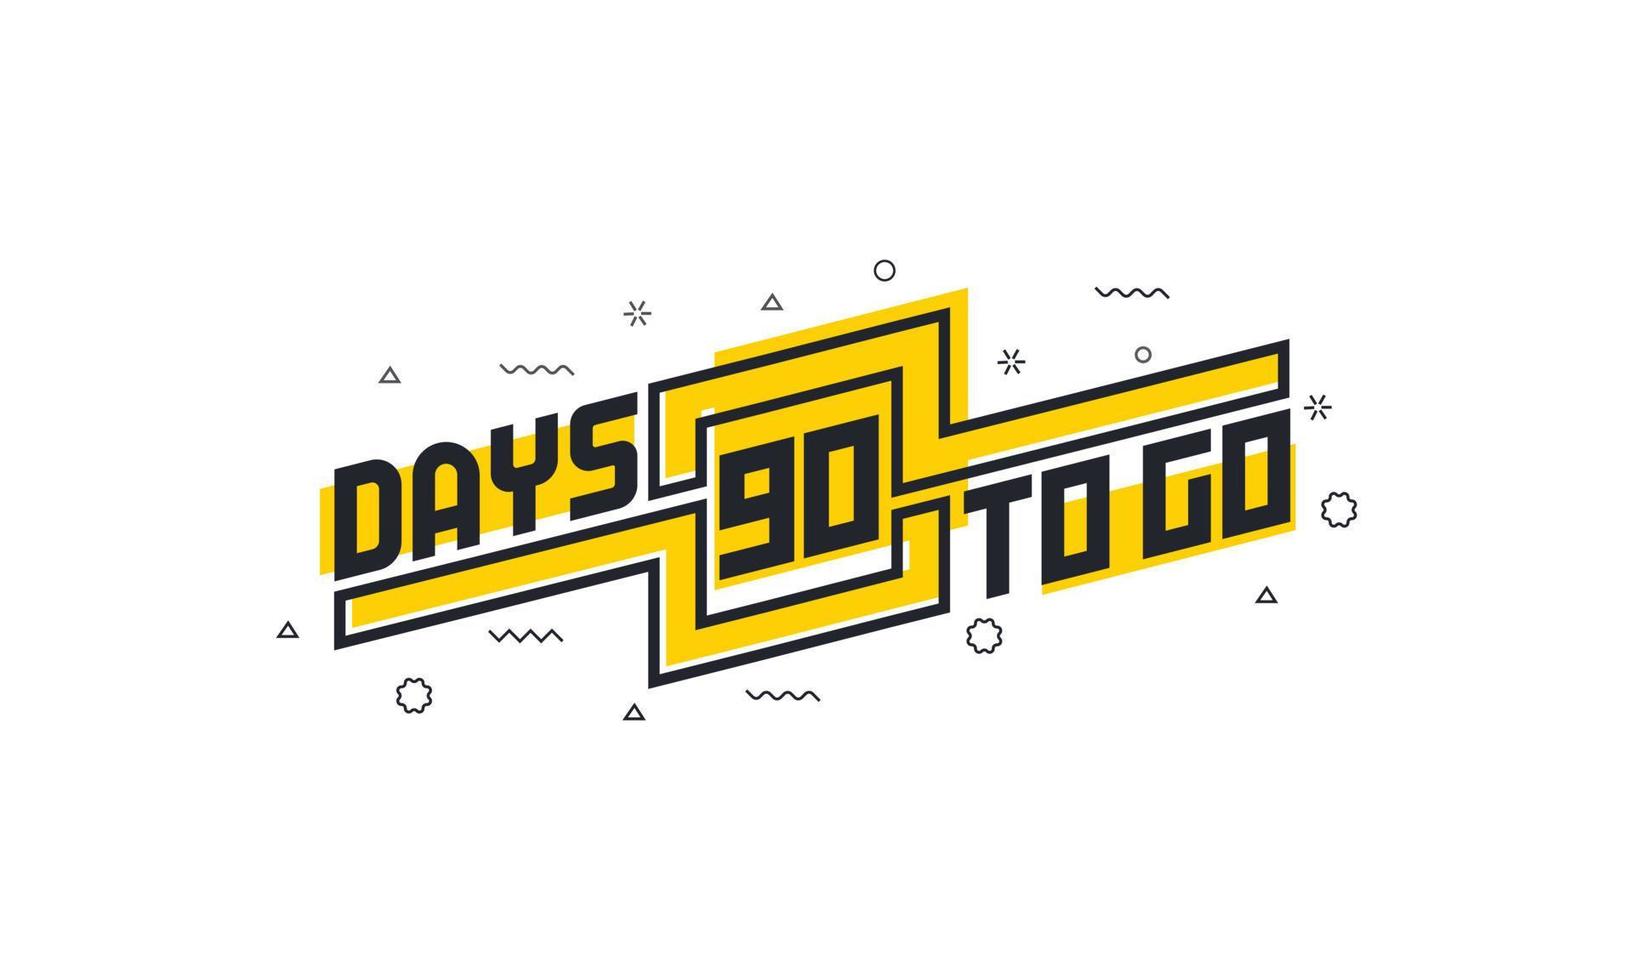 90 days to go countdown sign for sale or promotion. vector